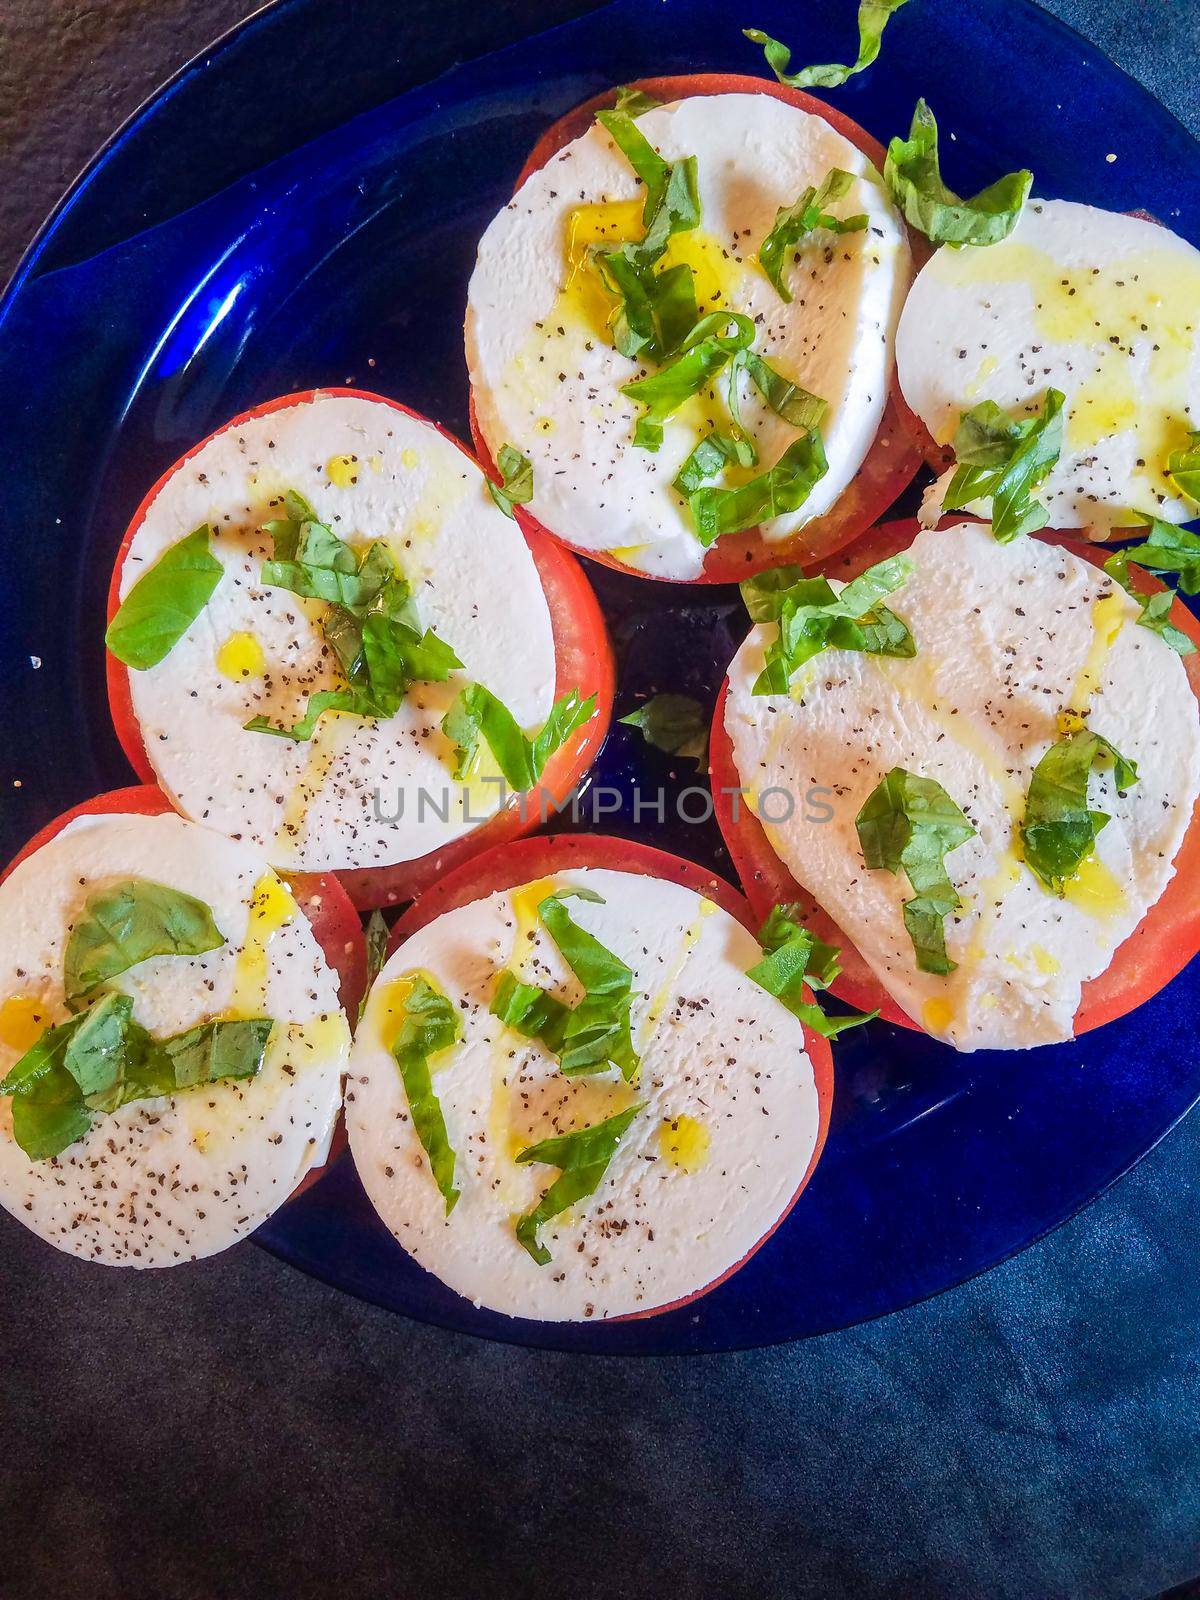 Keto style fresh Italian caprese salad. Mozzarella slices served on slices of beefsteak tomatoes, topped with fresh chopped basil, olive oil, salt and black pepper.